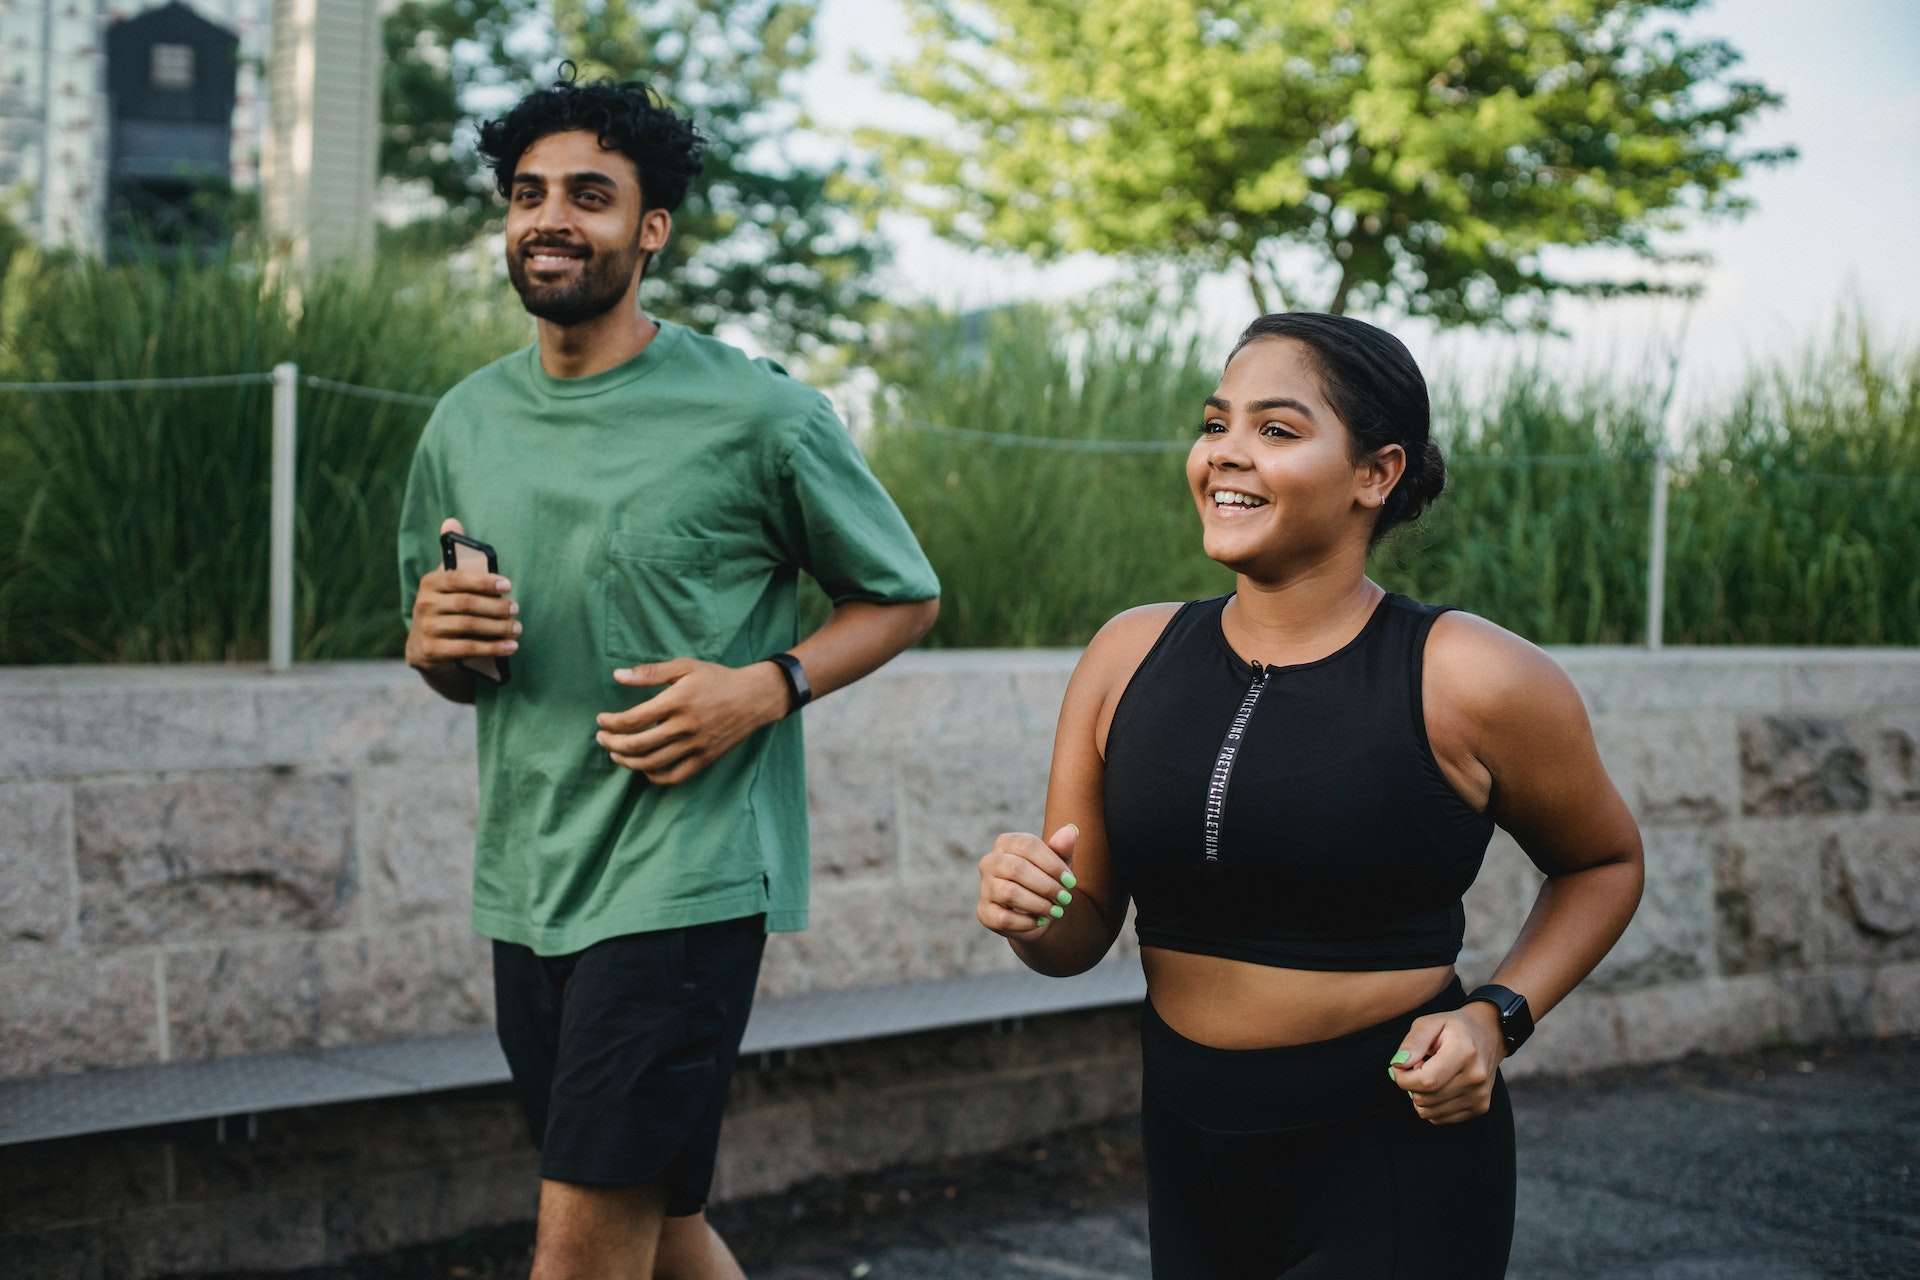 Man and Woman Smiling While Jogging Together